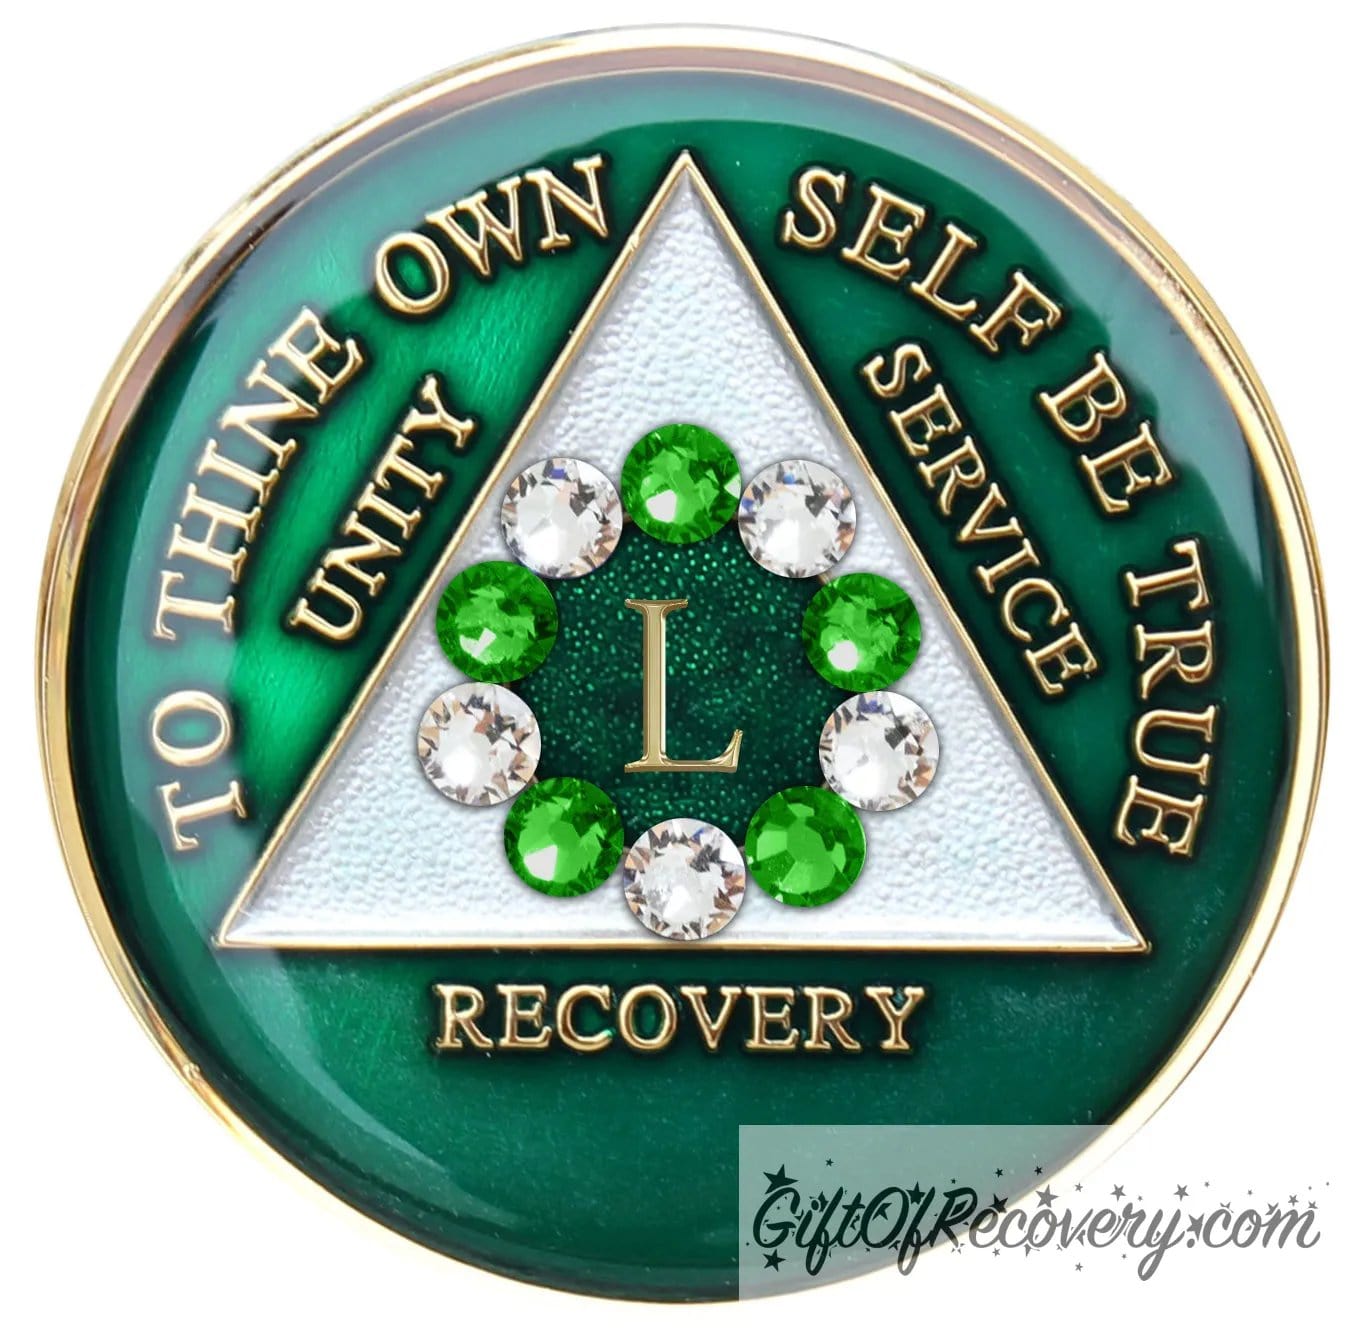 50 year emerald green AA medallion with the 10th step in emphasis in the center, 5 emerald green genuine crystals and 5 clear genuine crystals, inside the triangle is pearl white, while the circle is sparkle green. To thine own self be true, unity, service, recovery, and the roman numeral 1, are 14k gold and sealed with resin for a glossy finish.